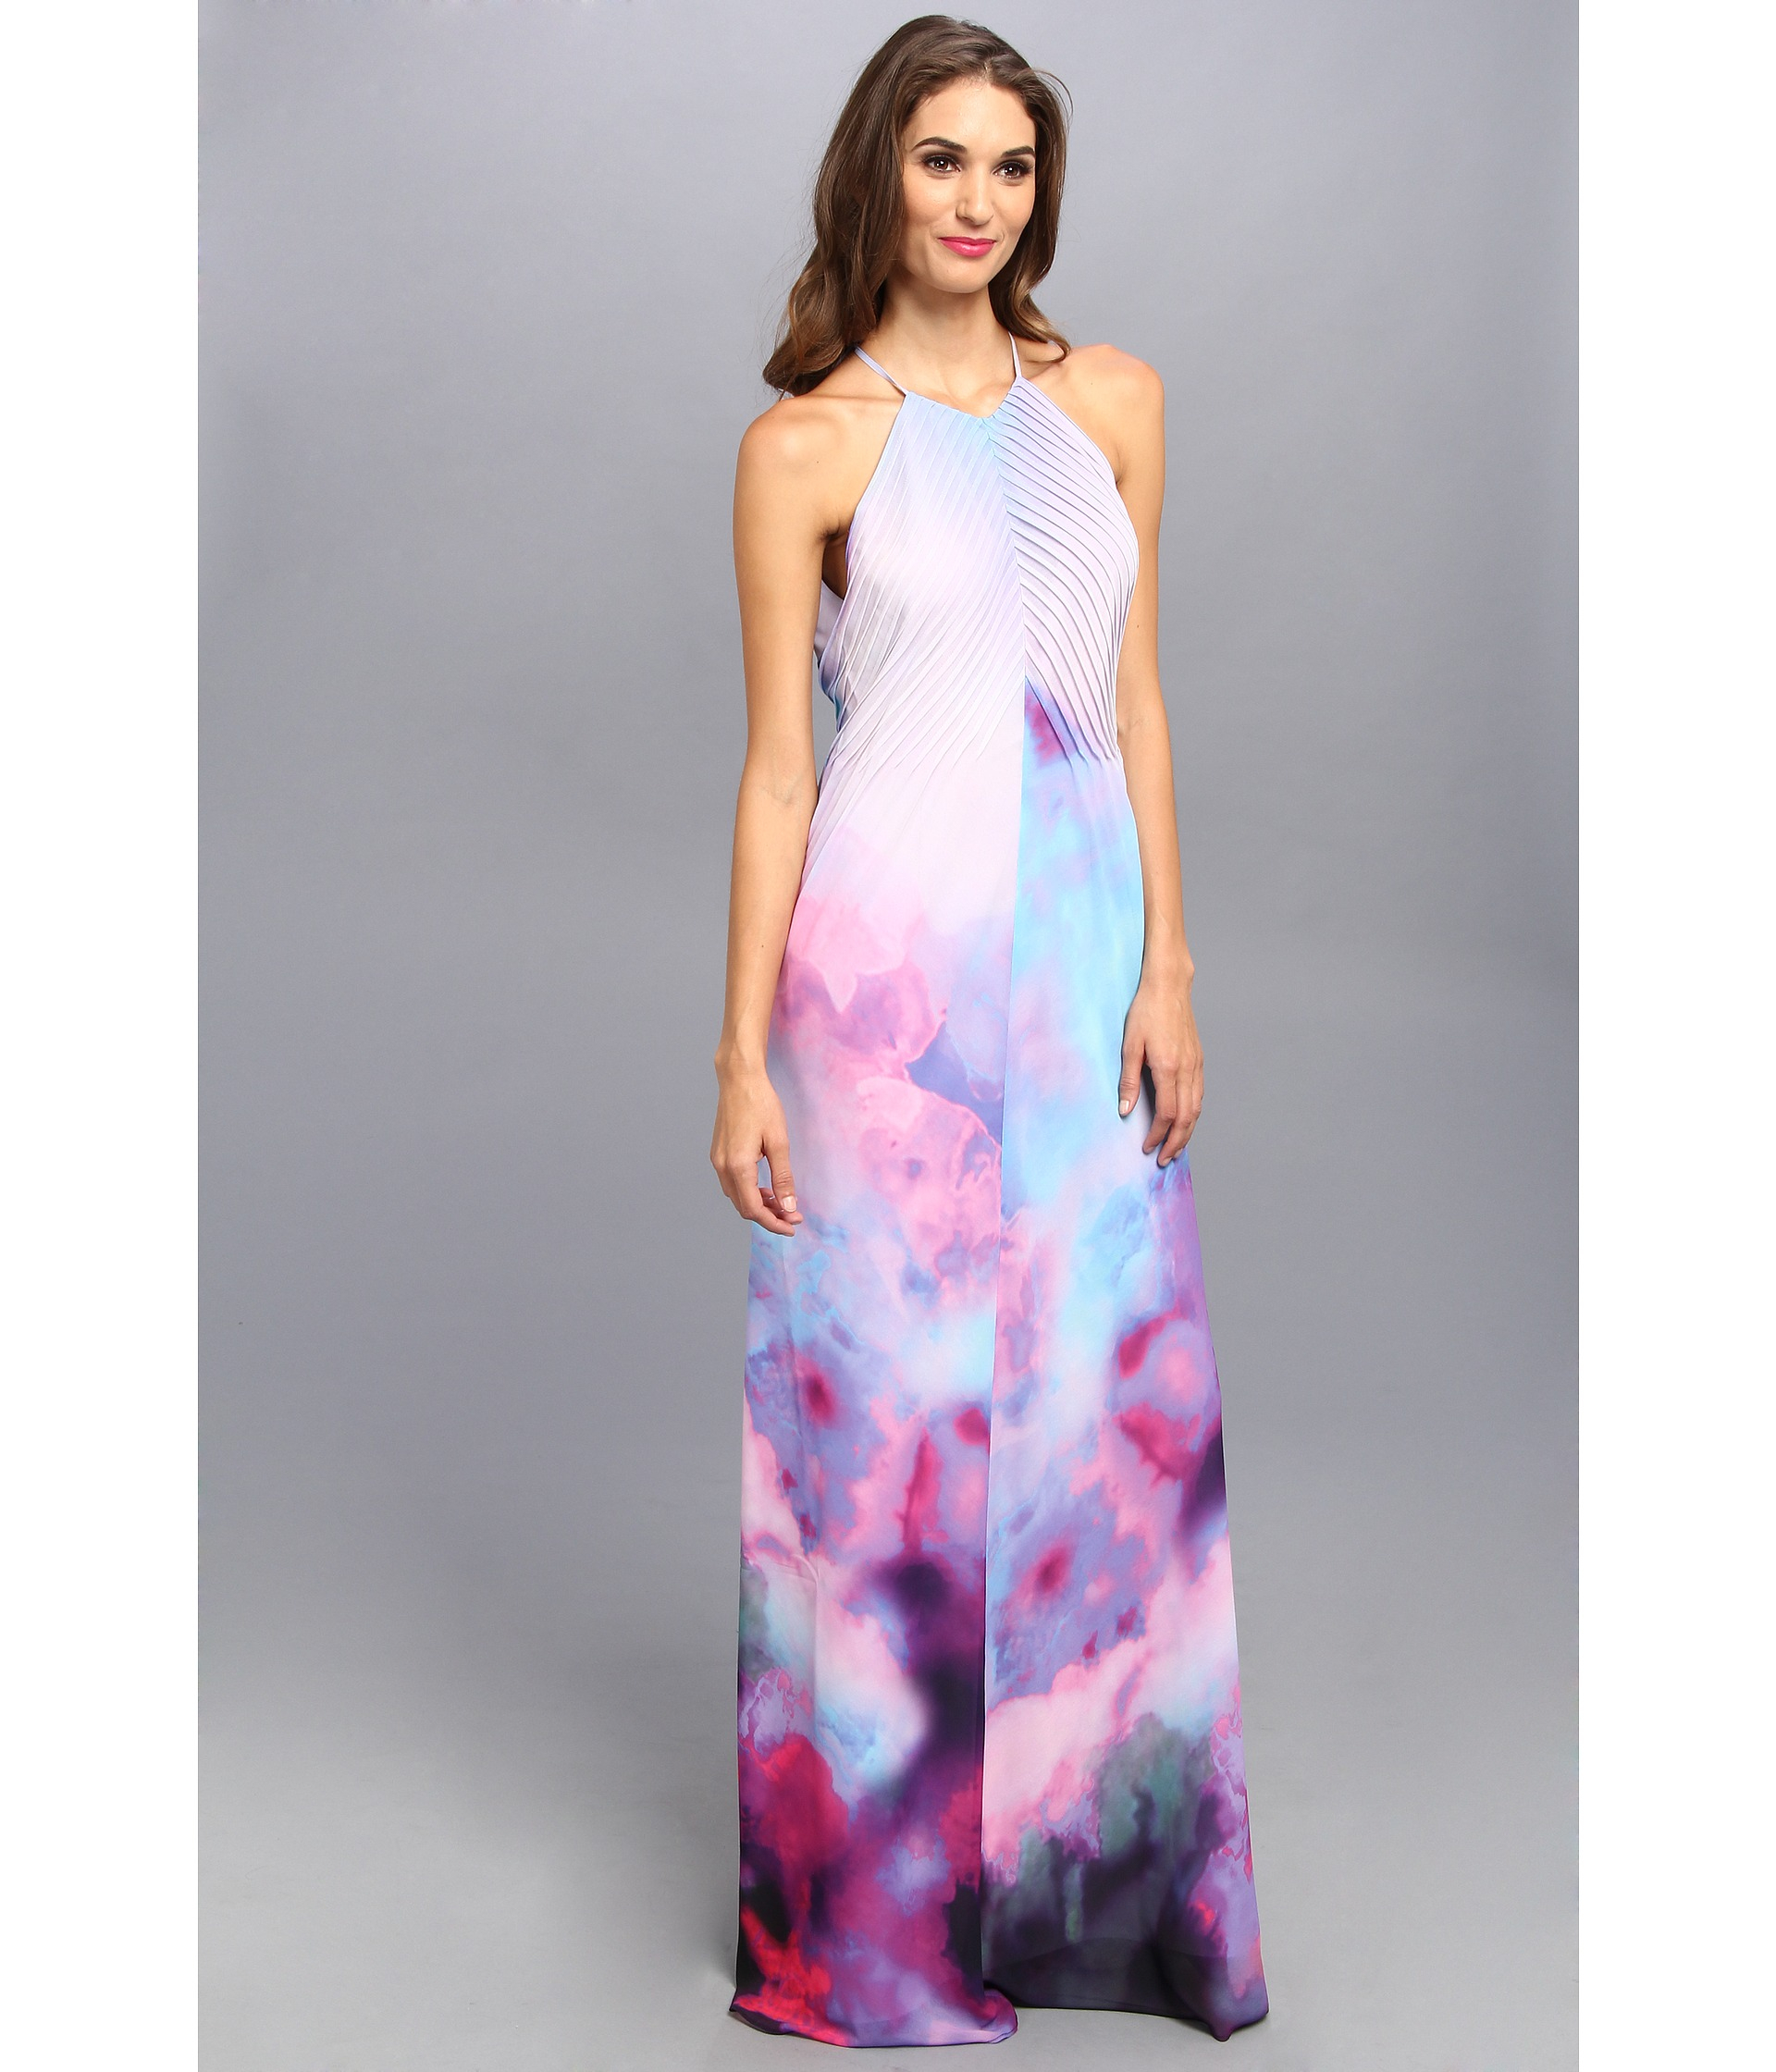 Lyst - Ted Baker Alexxis Summer At Dusk Print Maxi Dress in Gray